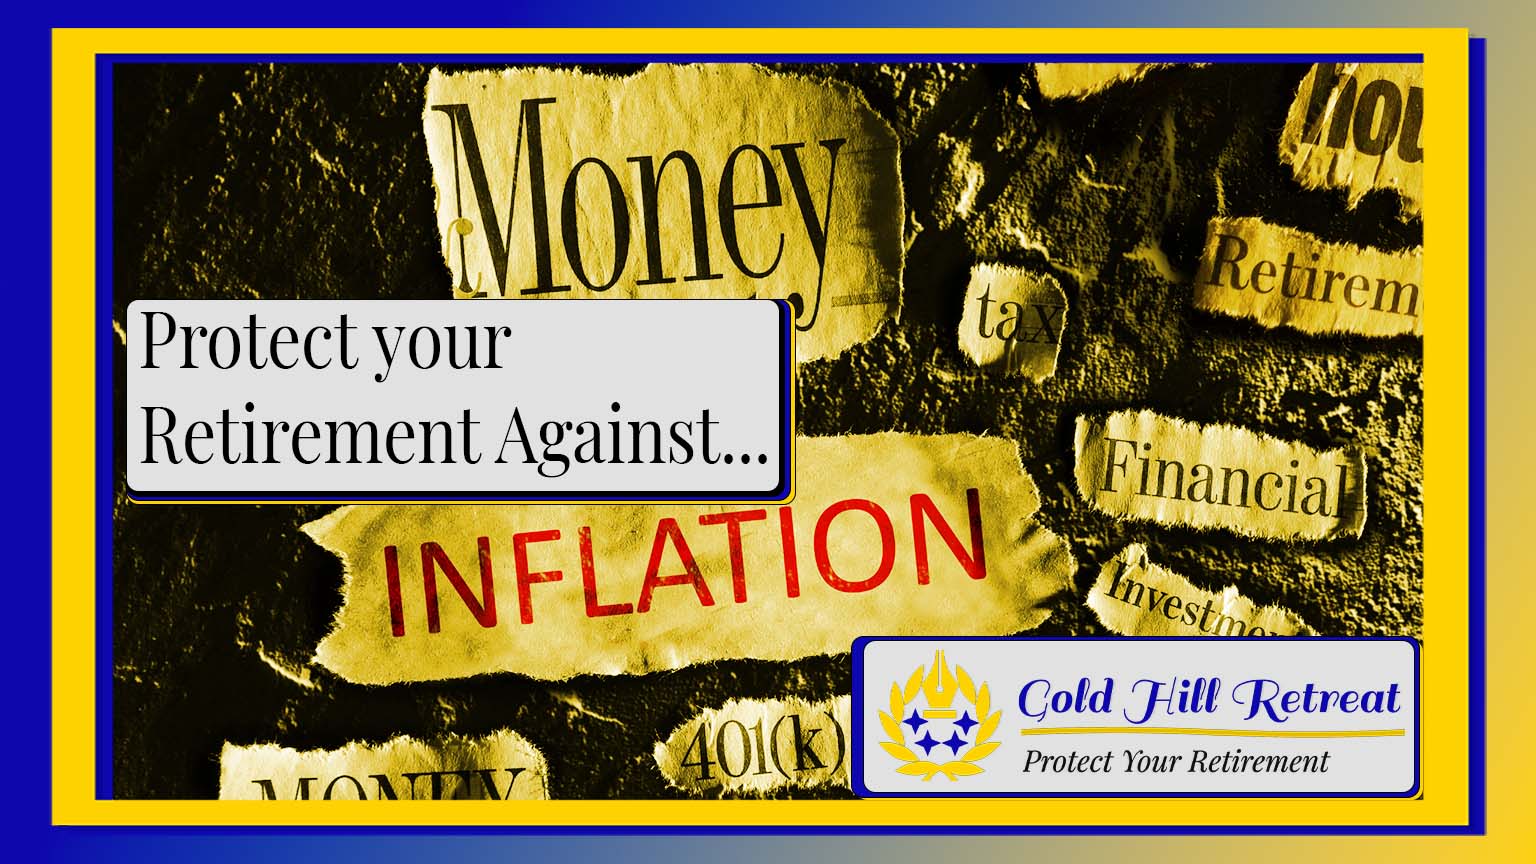 Protect Your Retirement from Inflation with Augusta Precious Metals' Gold IRA